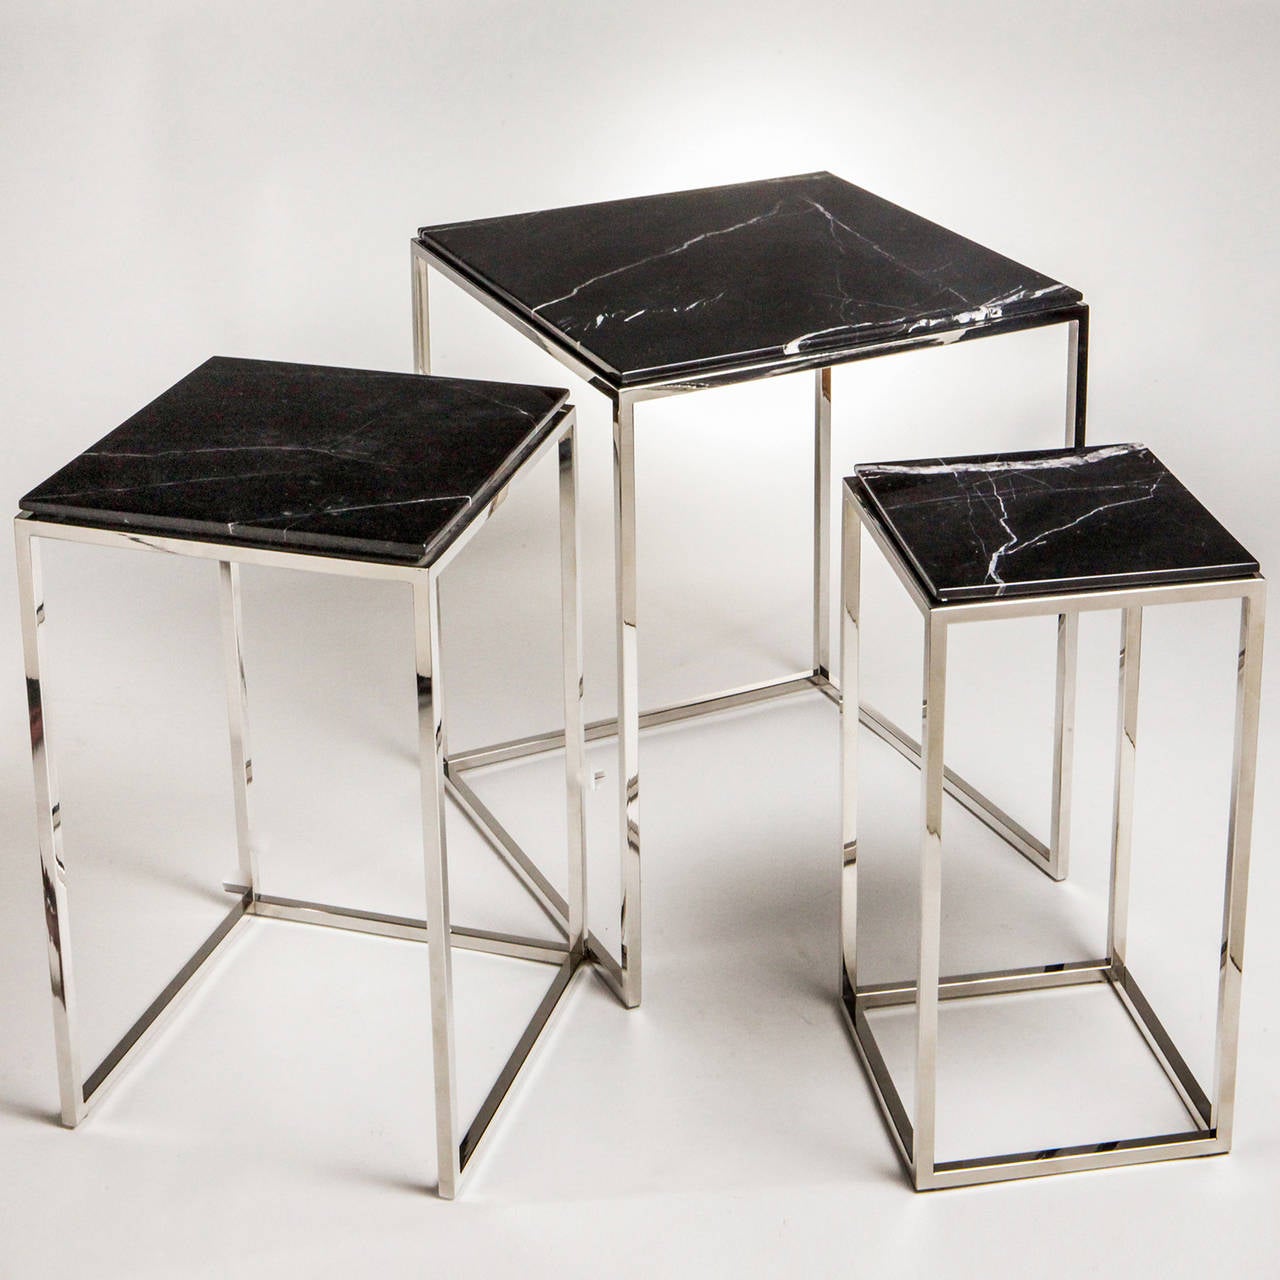 Set of three stacking tables with polished nickel frames and black variegated marble tops. Tables nest into each other from the tallest (H: 25.5